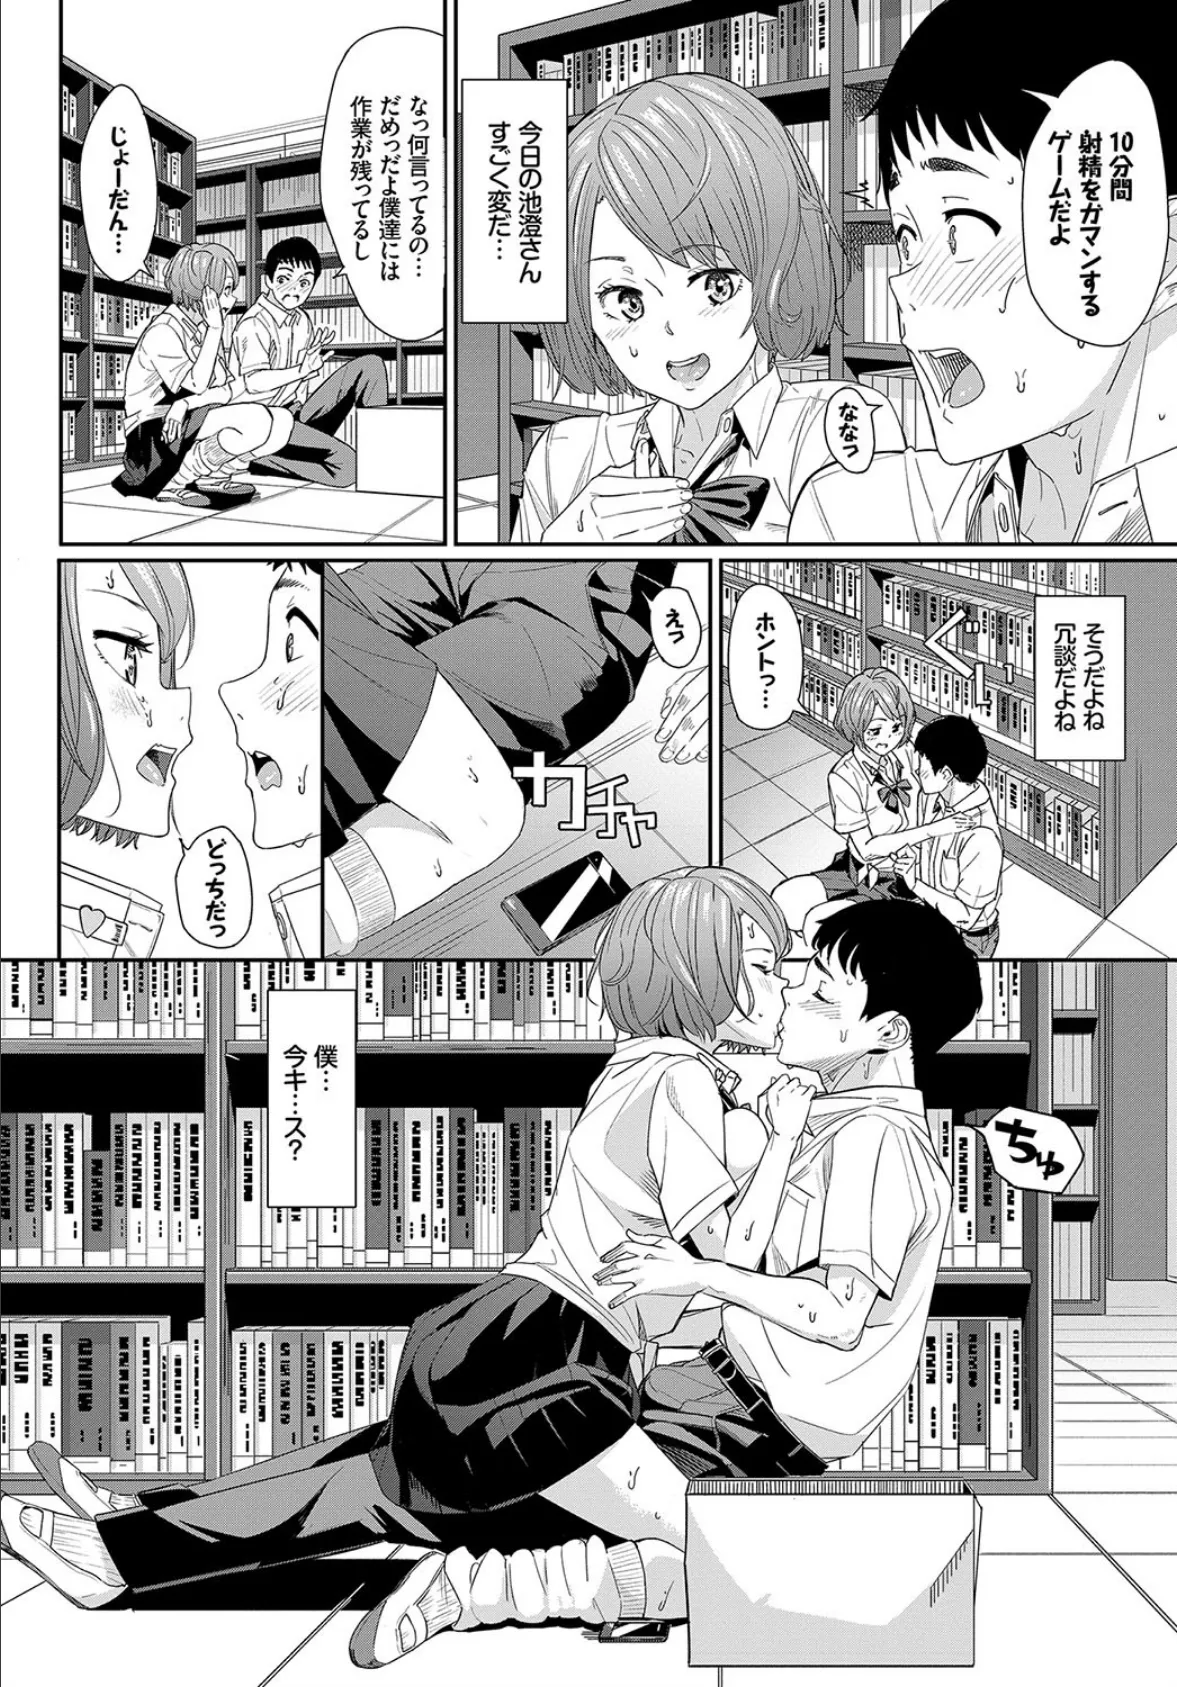 In Library〜チェリーの甘い10分間〜 4ページ